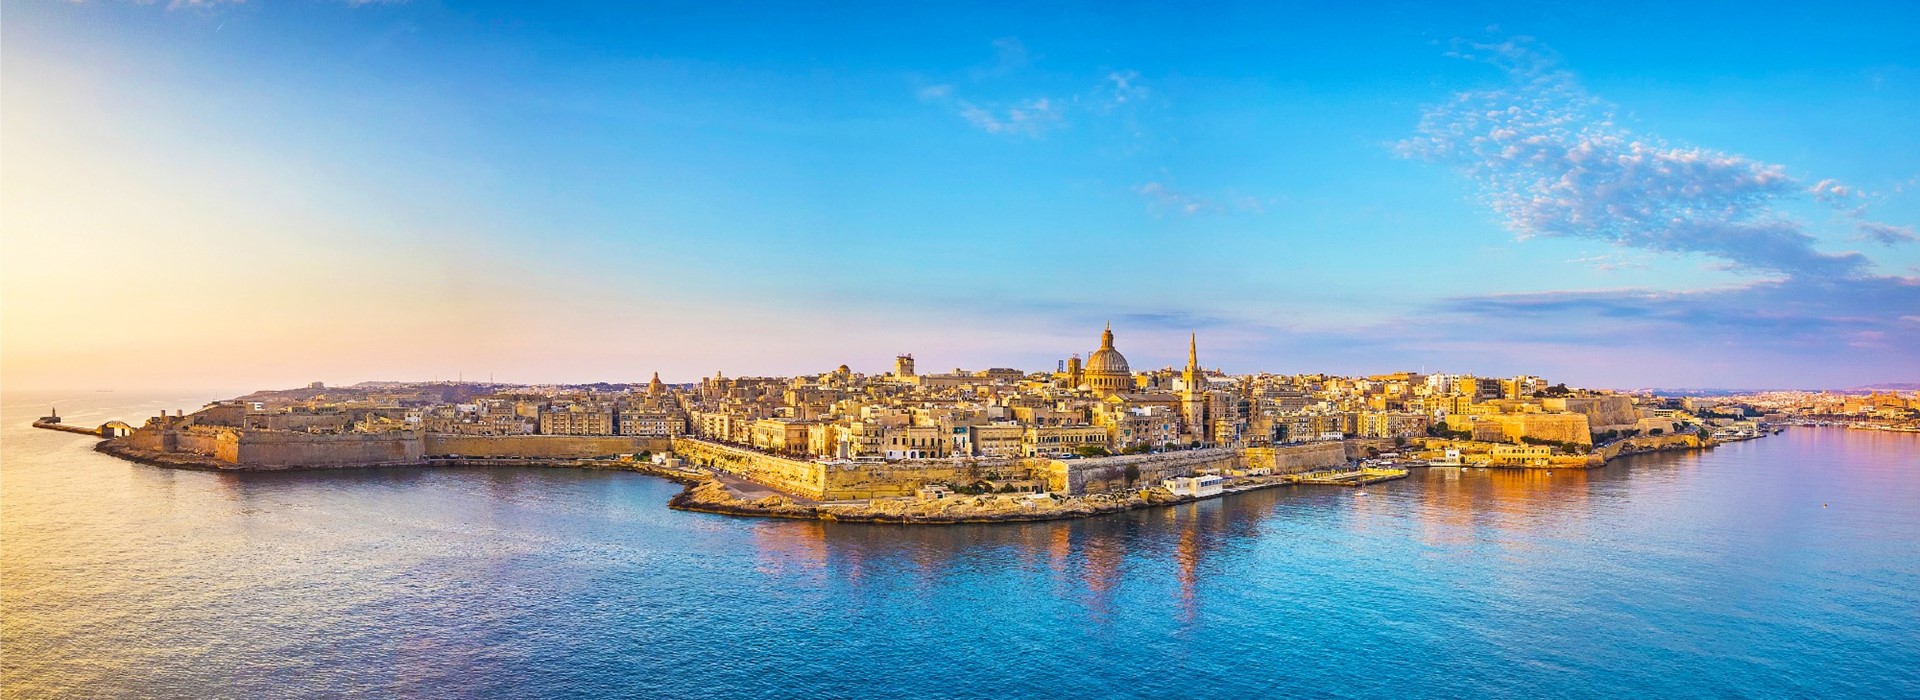 tourhub | Newmarket Holidays | Valletta, Mdina and the Wonders of Malta - Two Weeks Stay 